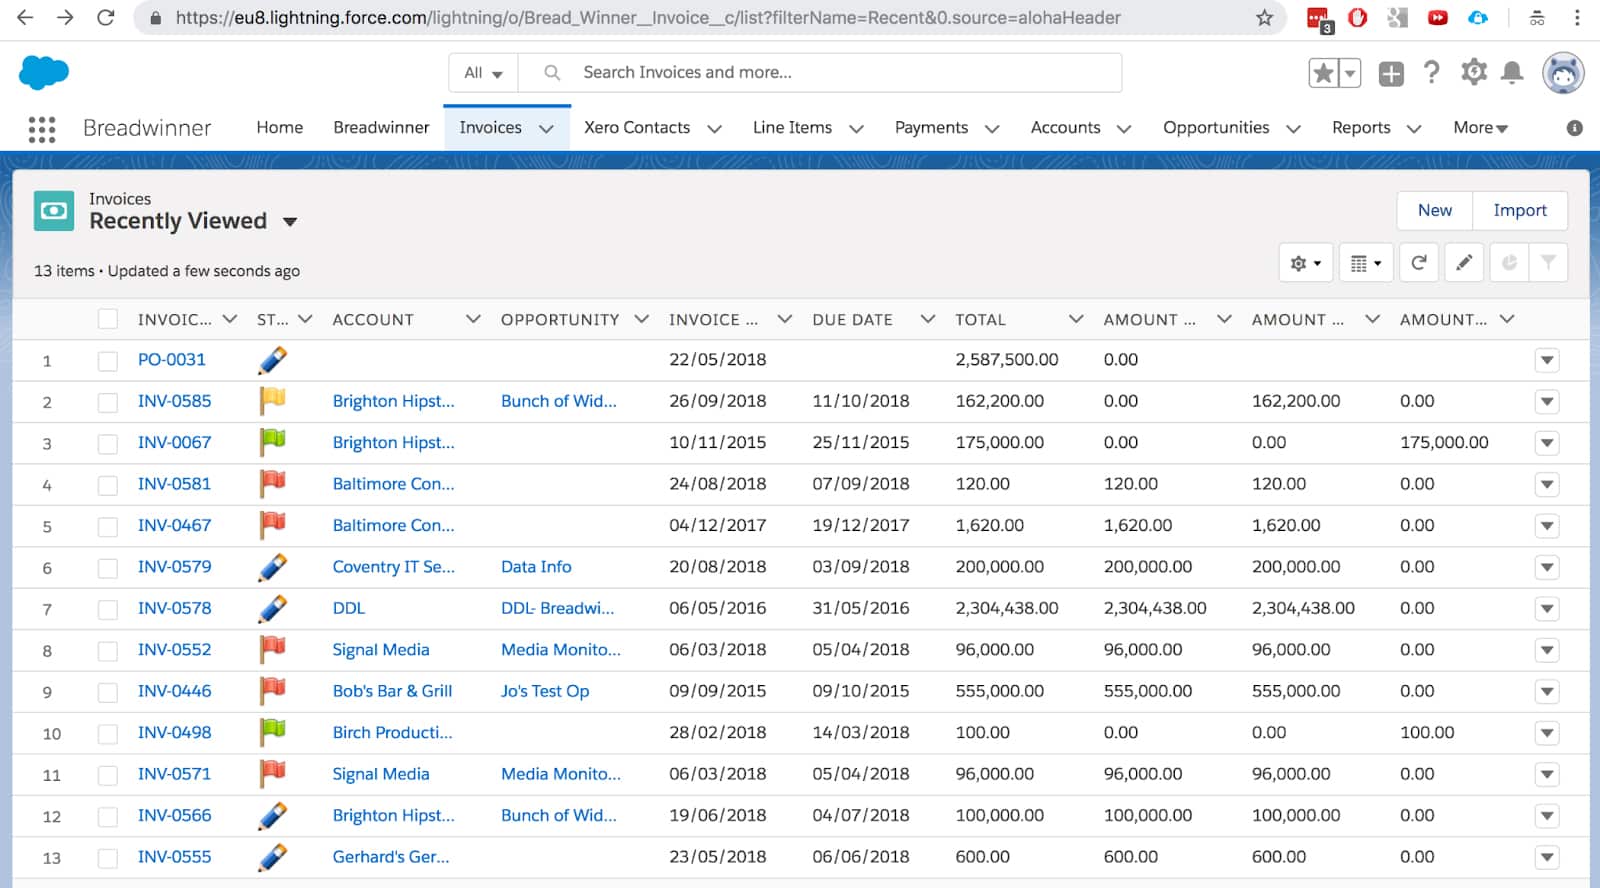 A sample list of invoices from Salesforce.